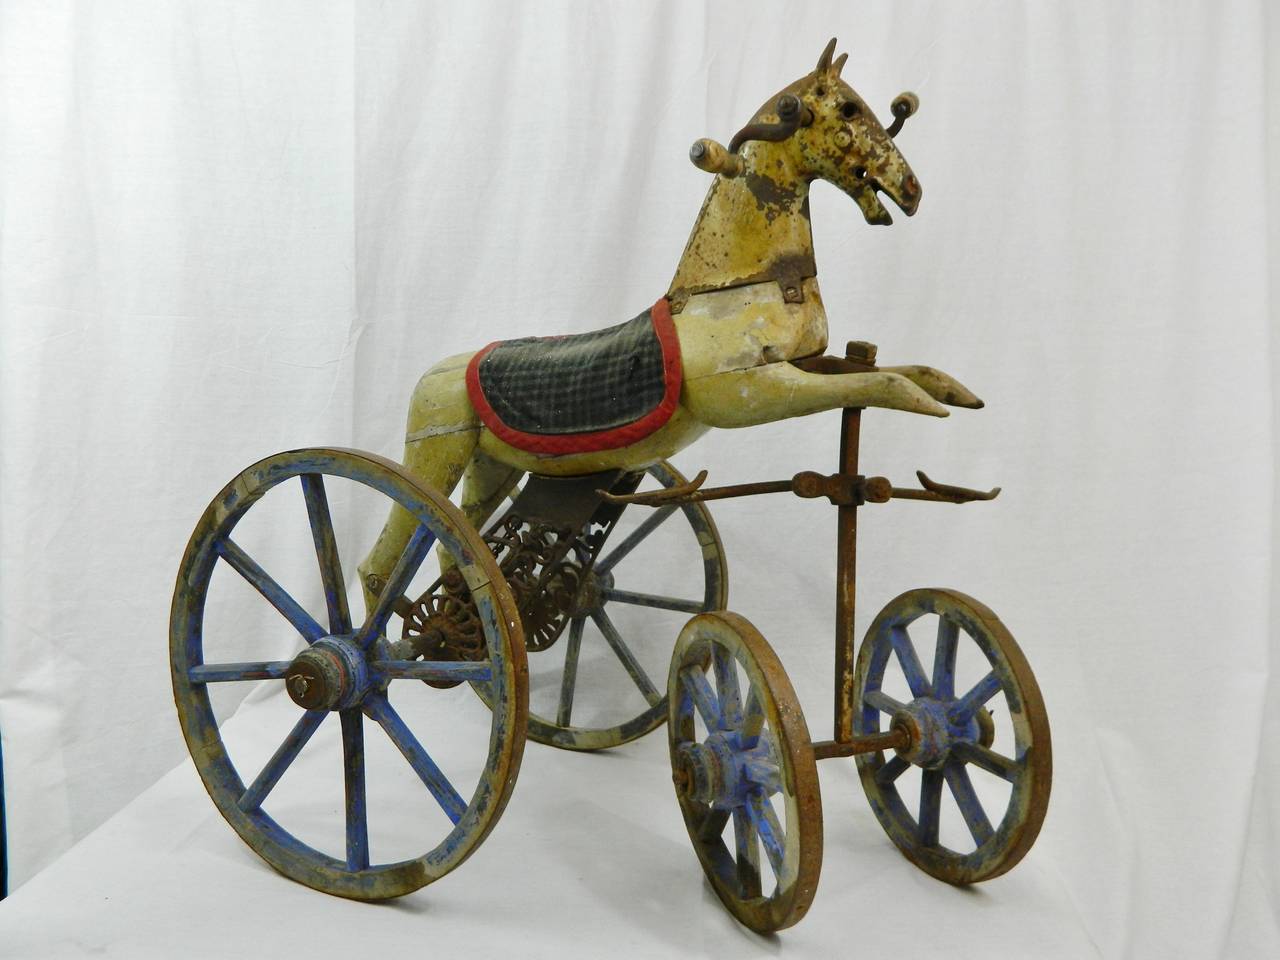 19th century French wood horse tricycle or toy riding horse.